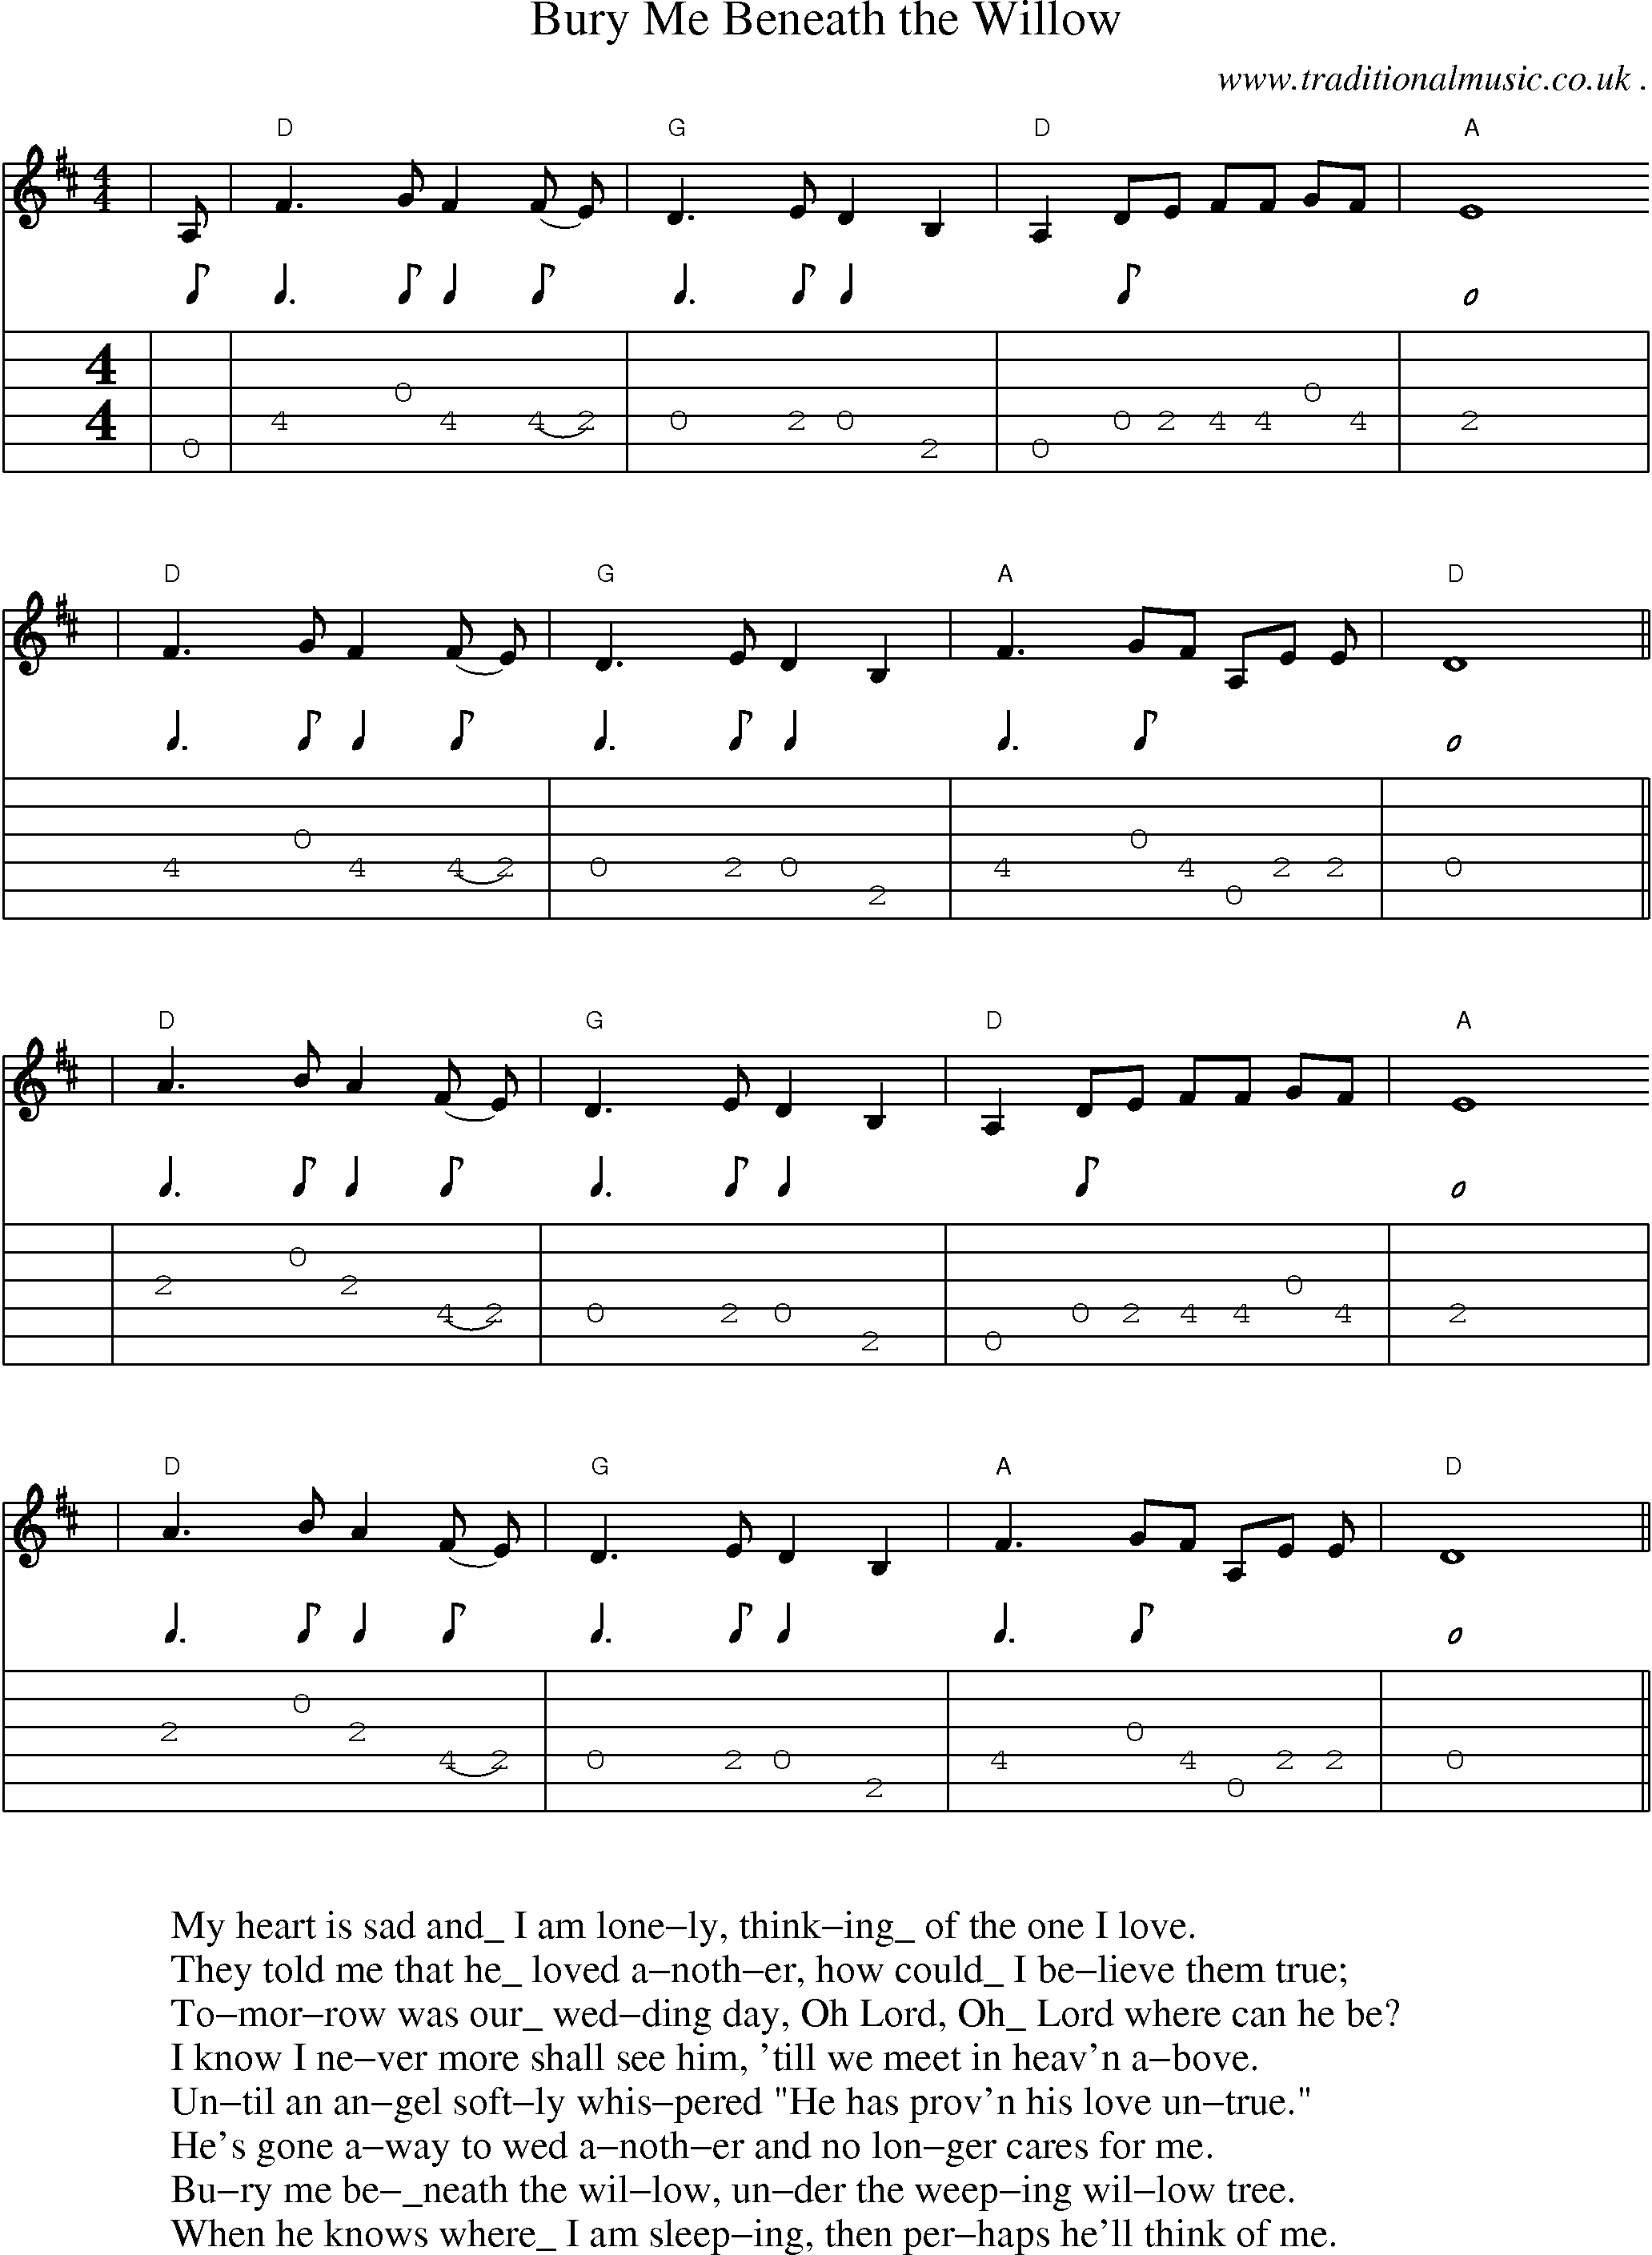 Music Score and Guitar Tabs for Bury Me Beneath The Willow